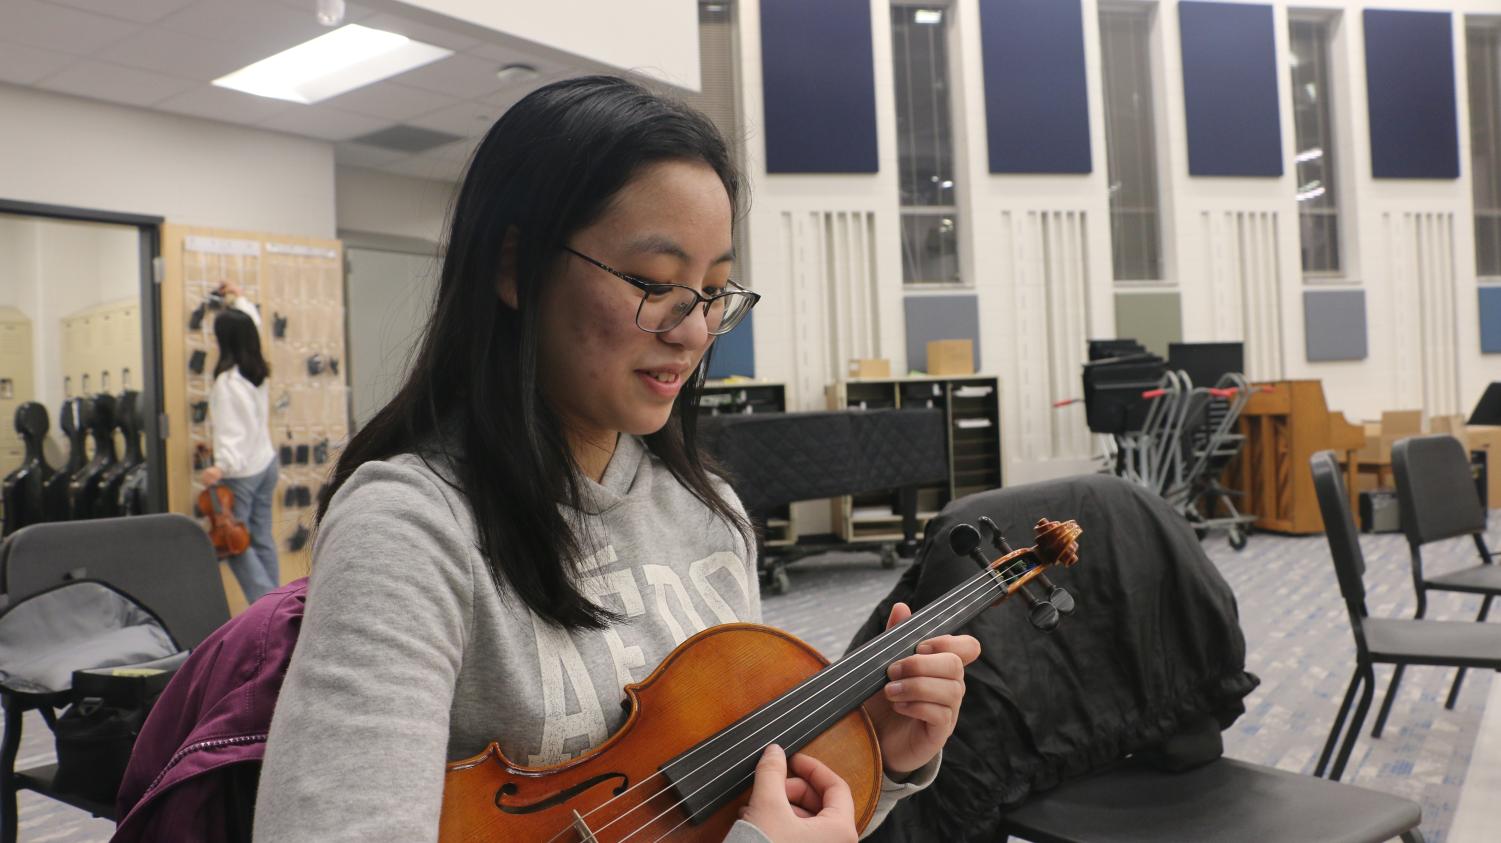 Rachel Wu, member of Symphony Orchestra and senior, studies her music sheet and practices her fingering before after-school rehearsal. According to Wu, “It helps to look through the piece before we start playing together.”